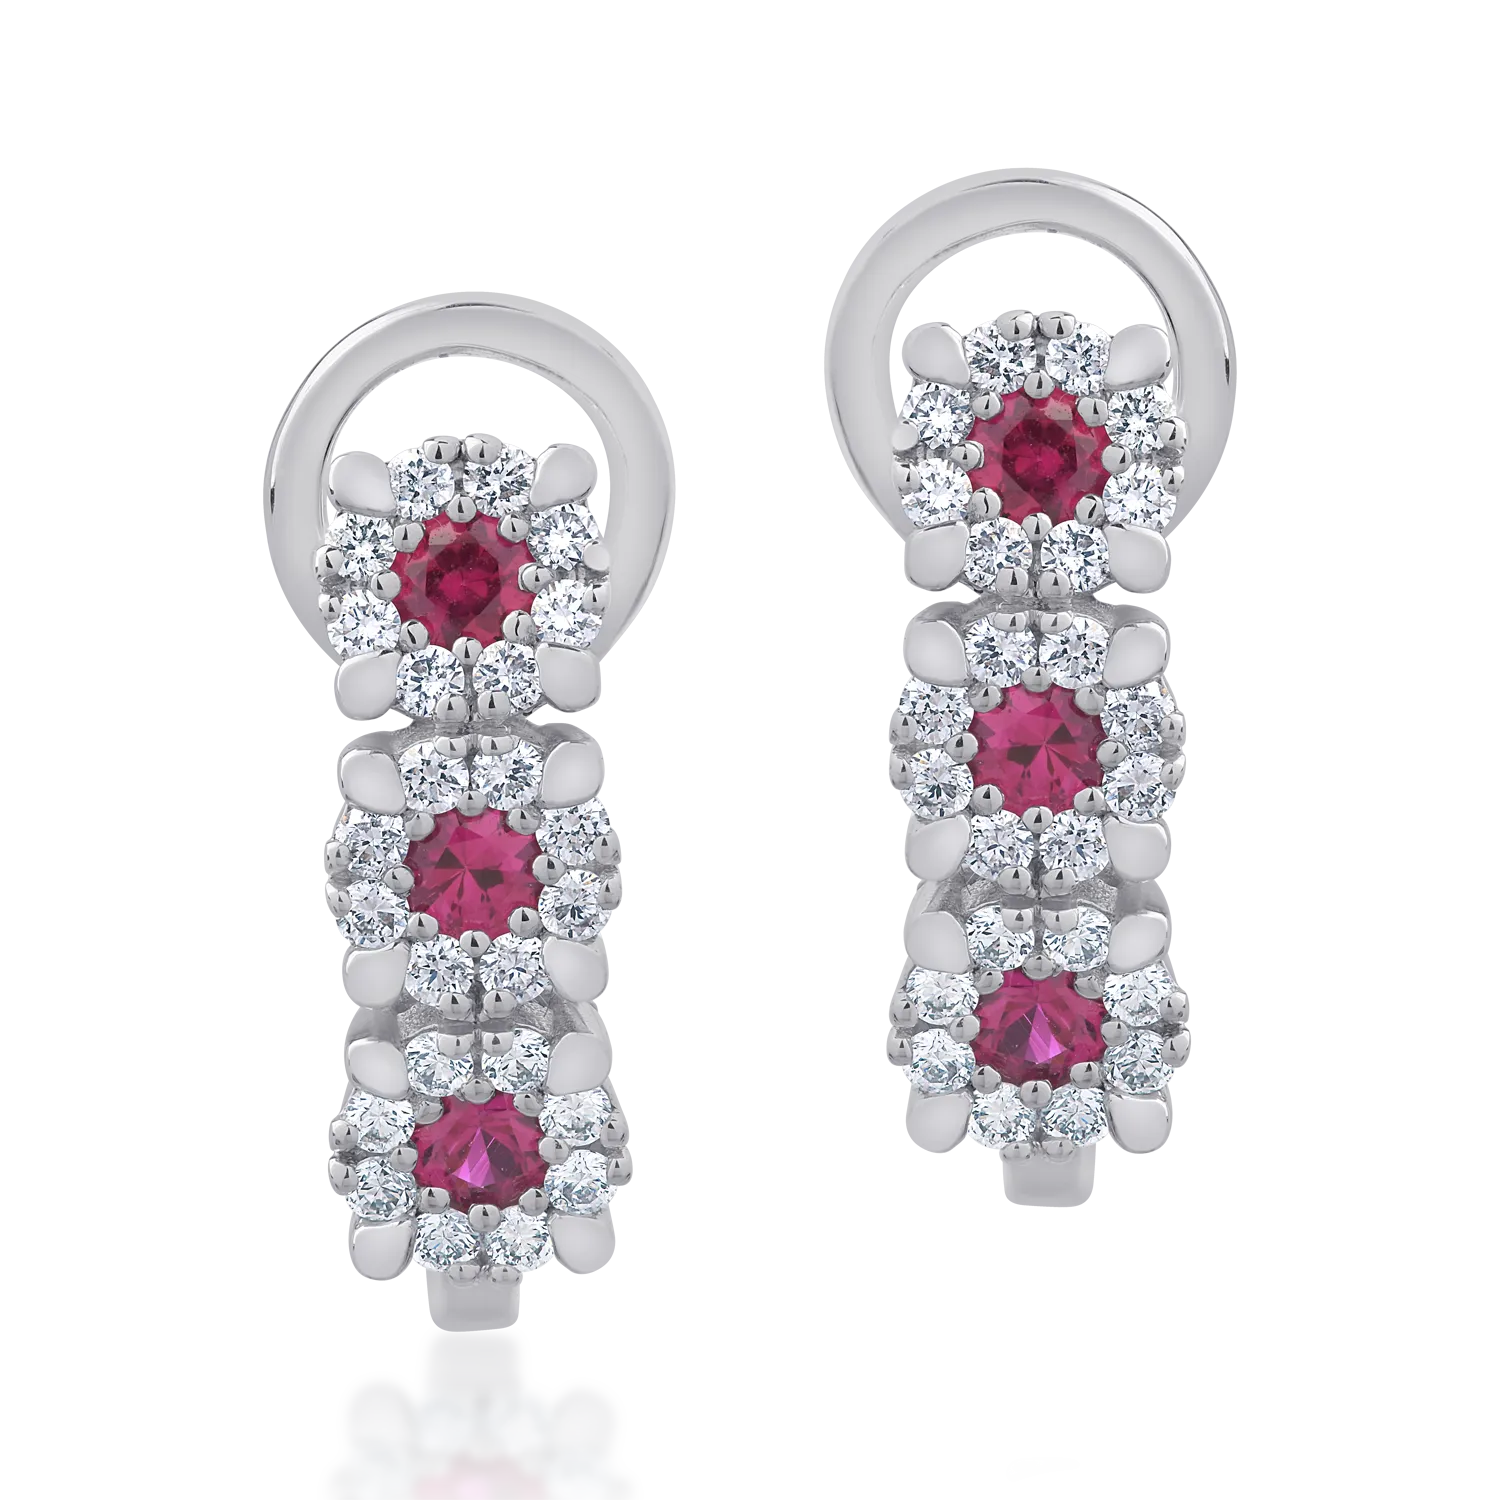 18K white gold earrings with 0.36ct rubies and 0.32ct diamonds